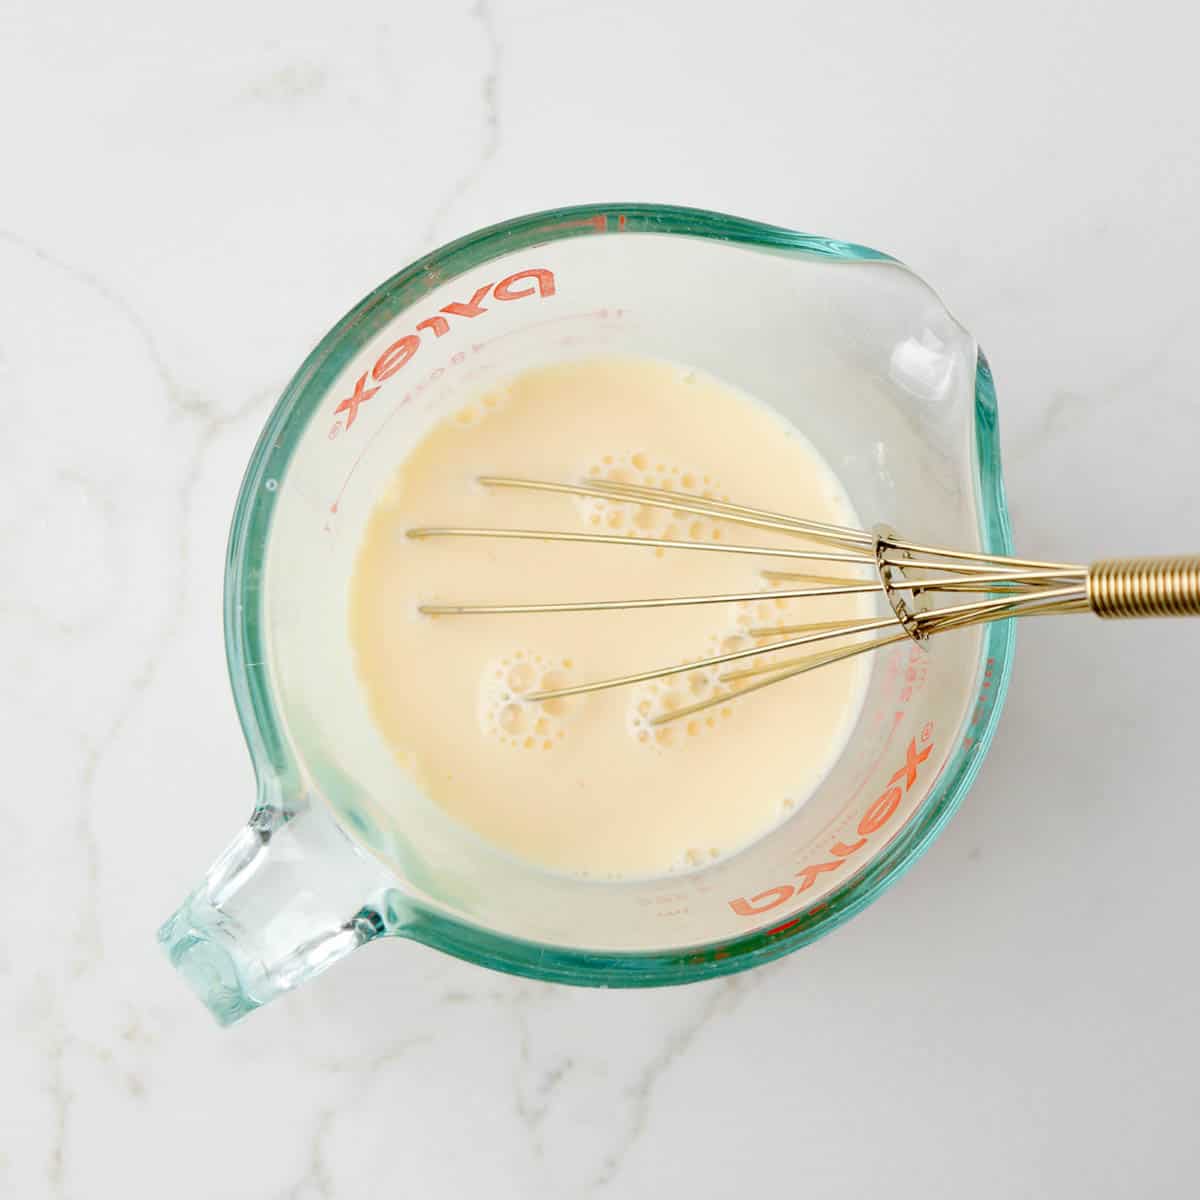 Milk and egg whisked together in a glass measuring cup.